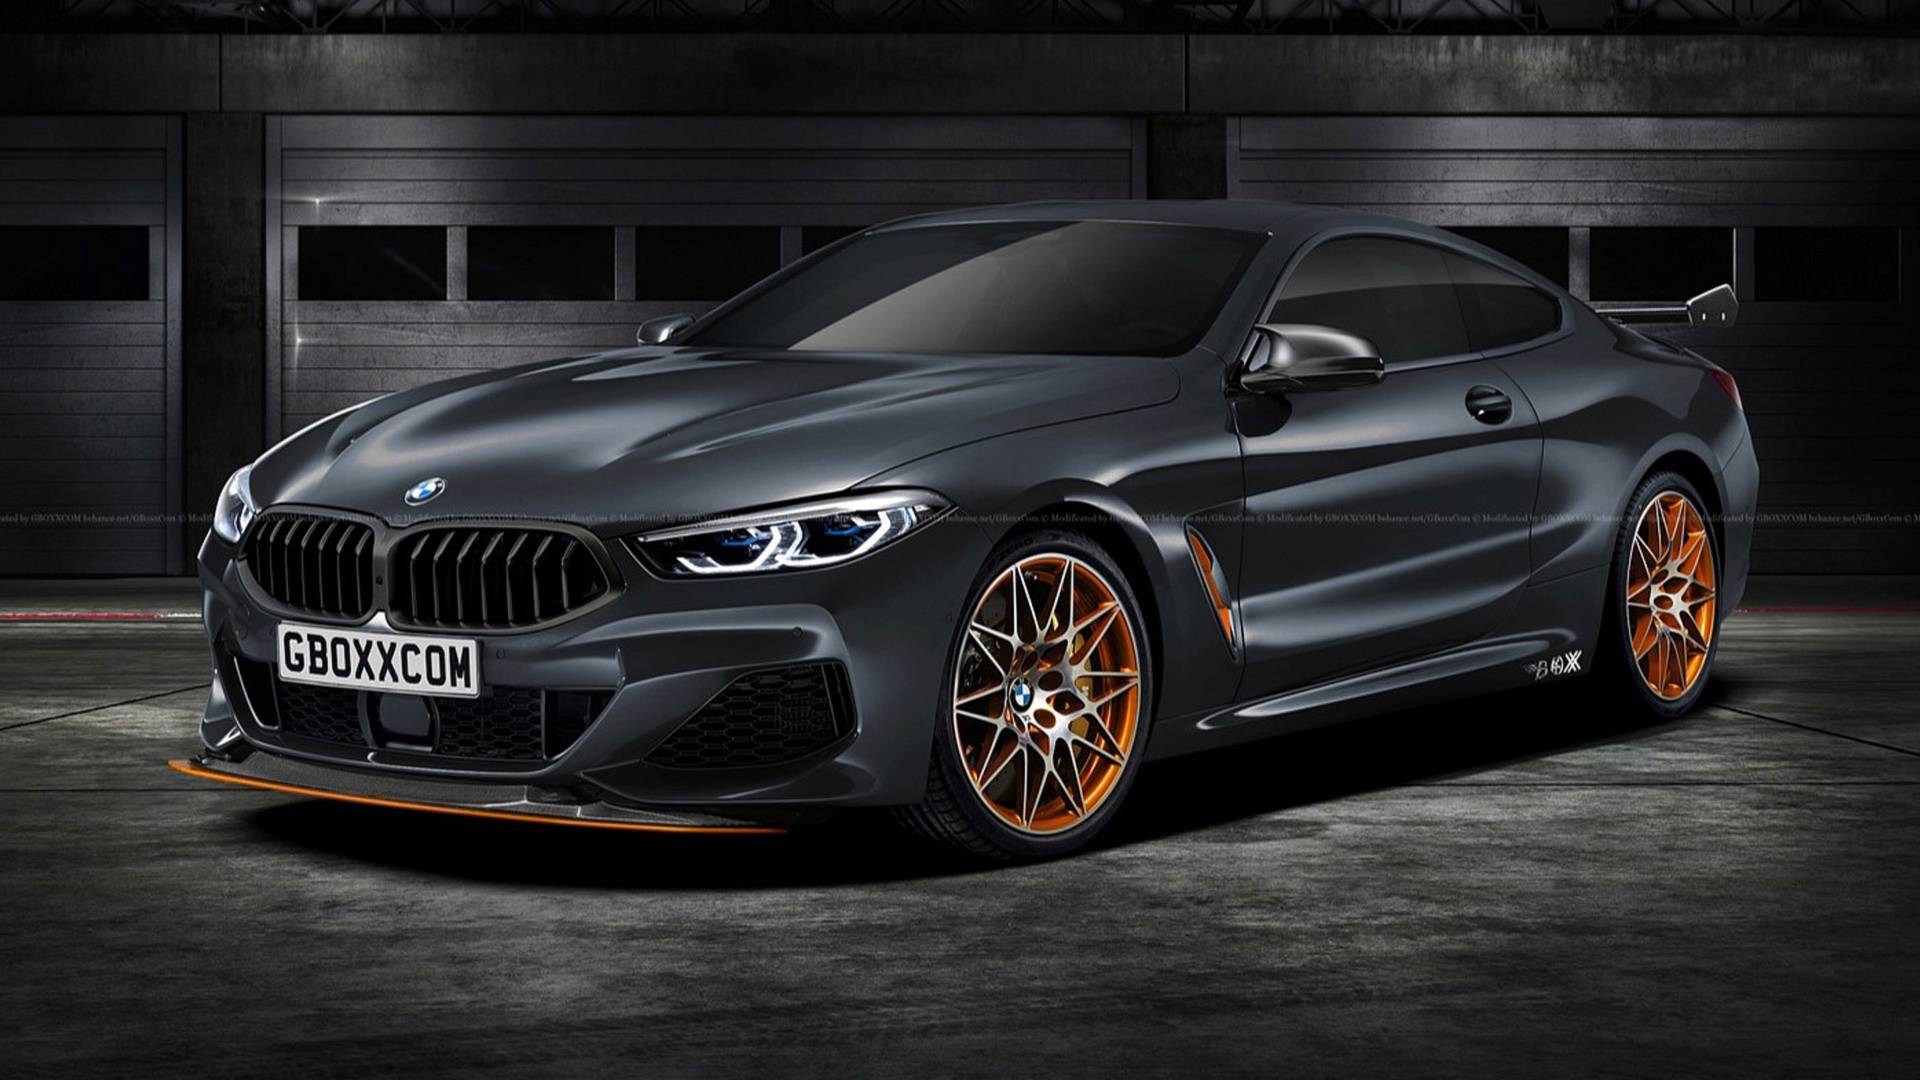 Hot BMW M8 Competition Rumored For 2019 With As Much As 620 HP